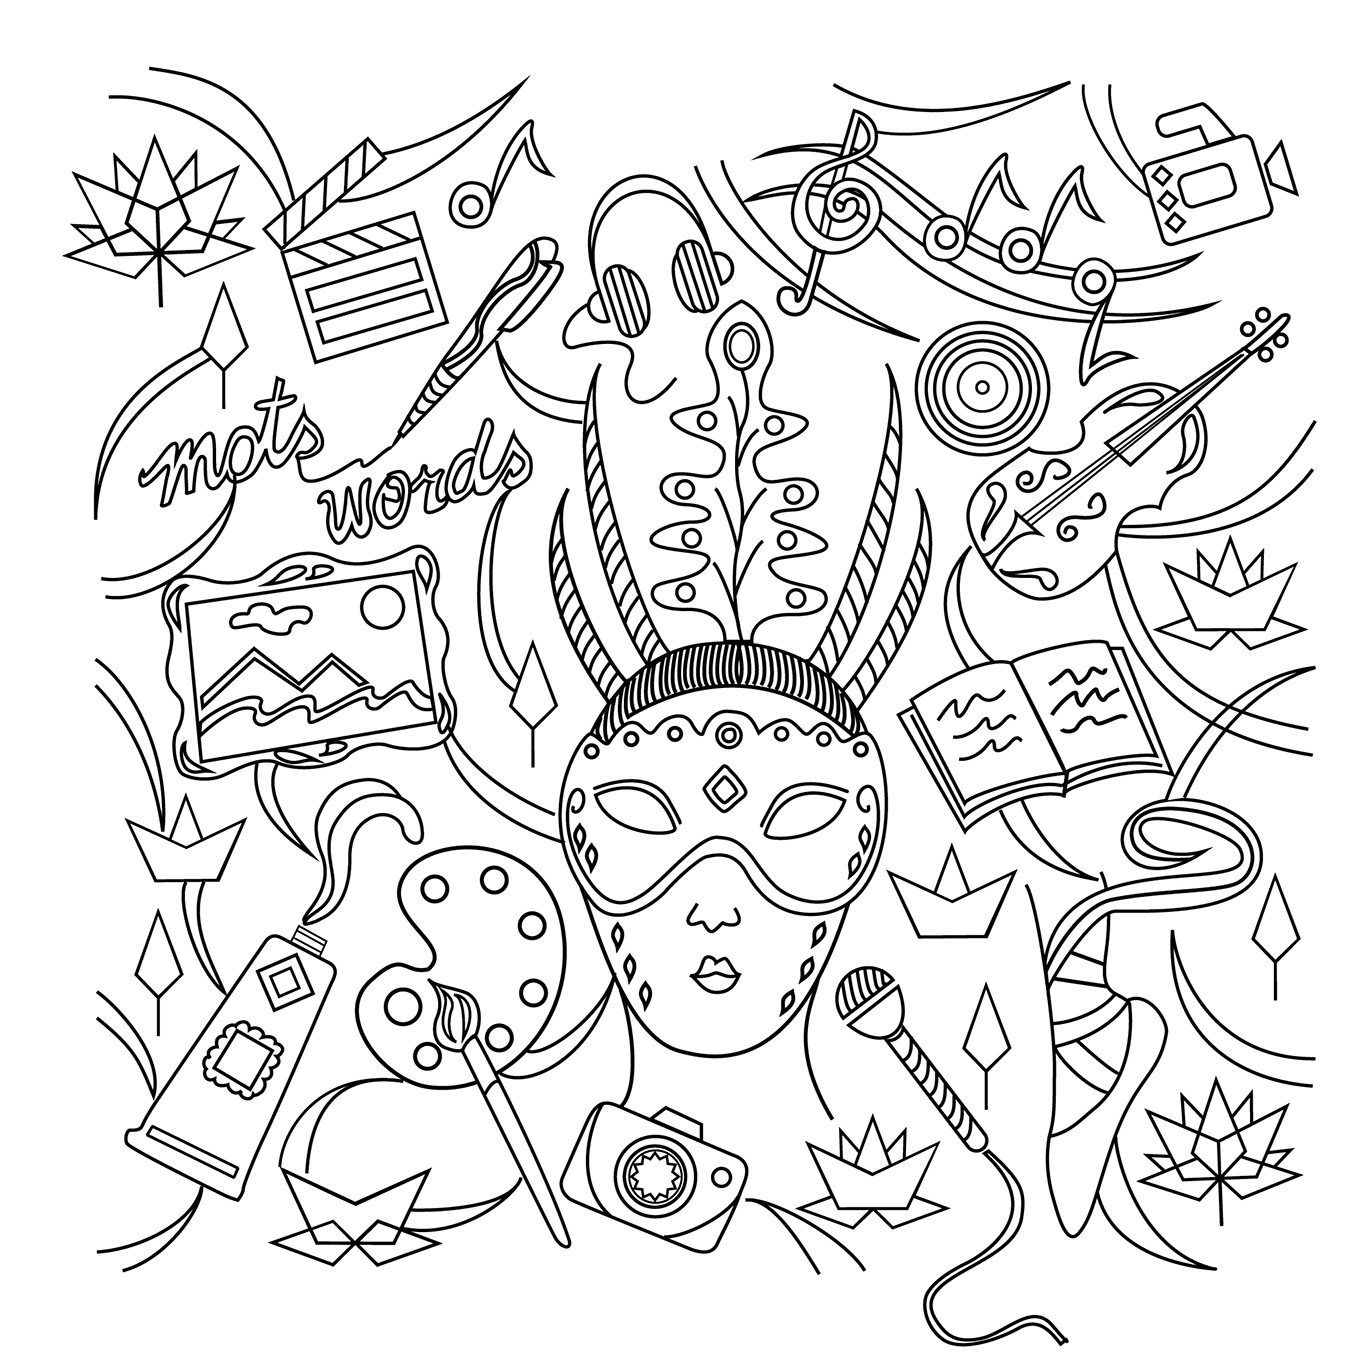 Colouring page featuring sample items that could be subject matter for copyright registration and a description of copyright.